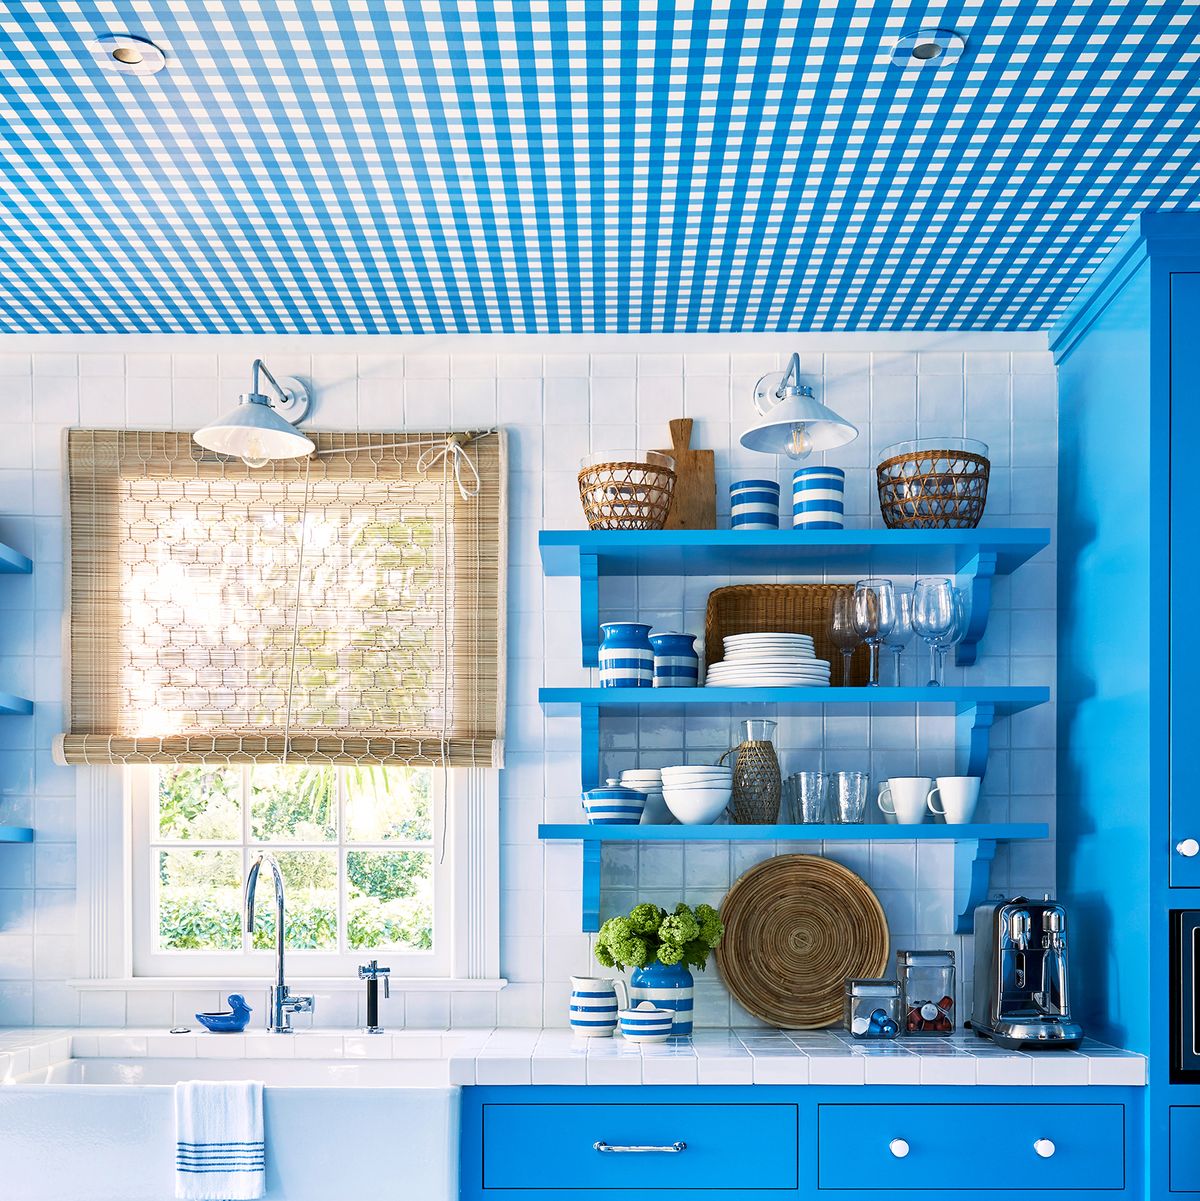 blue and white gingham kitchen with wallpapered ceiling